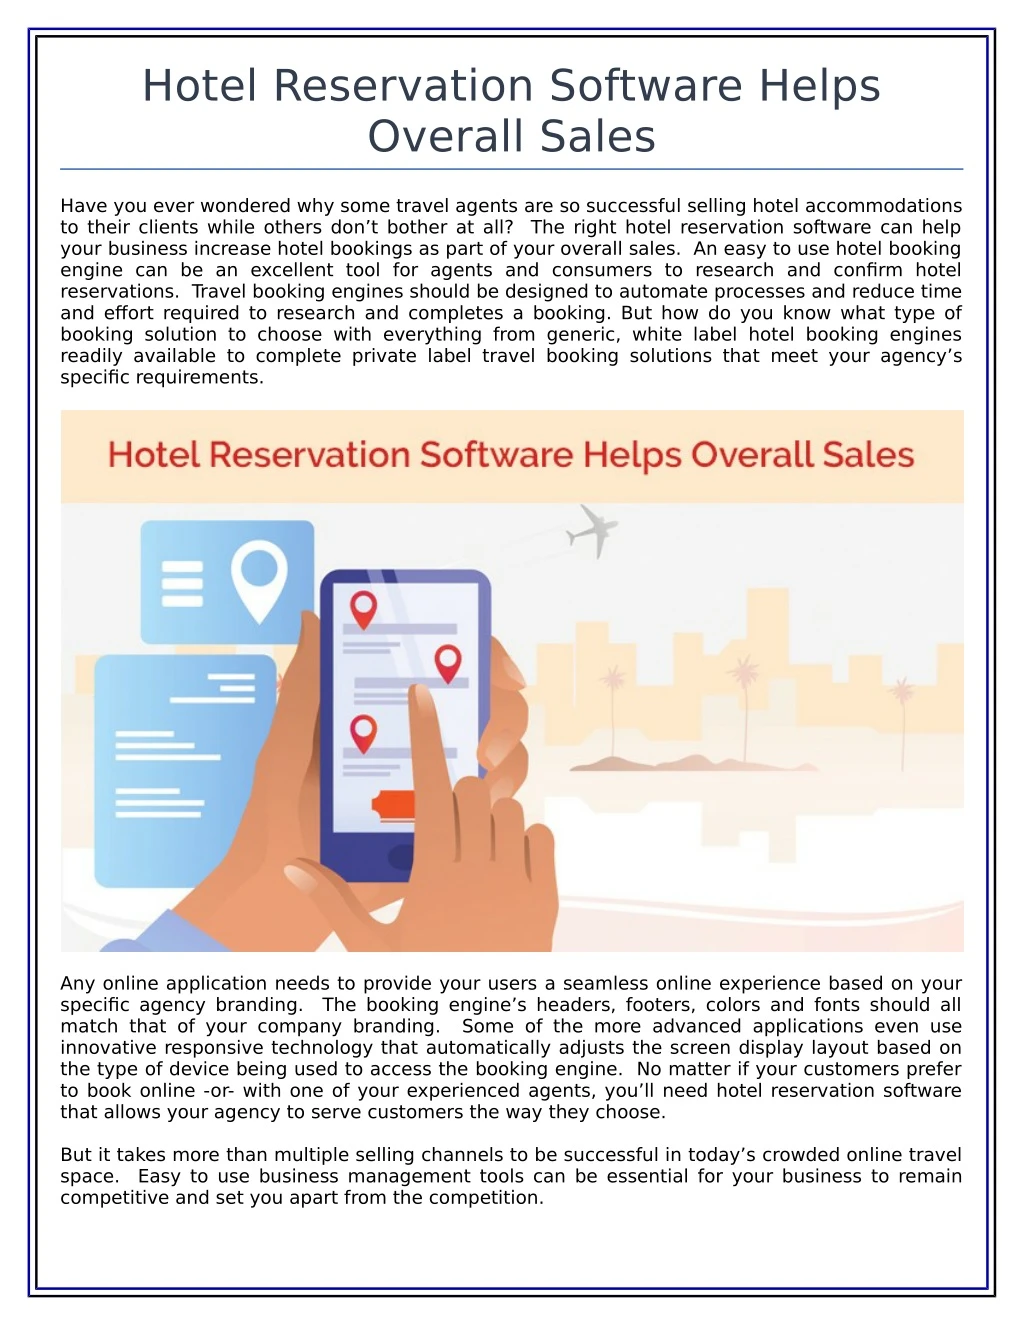 hotel reservation software helps overall sales